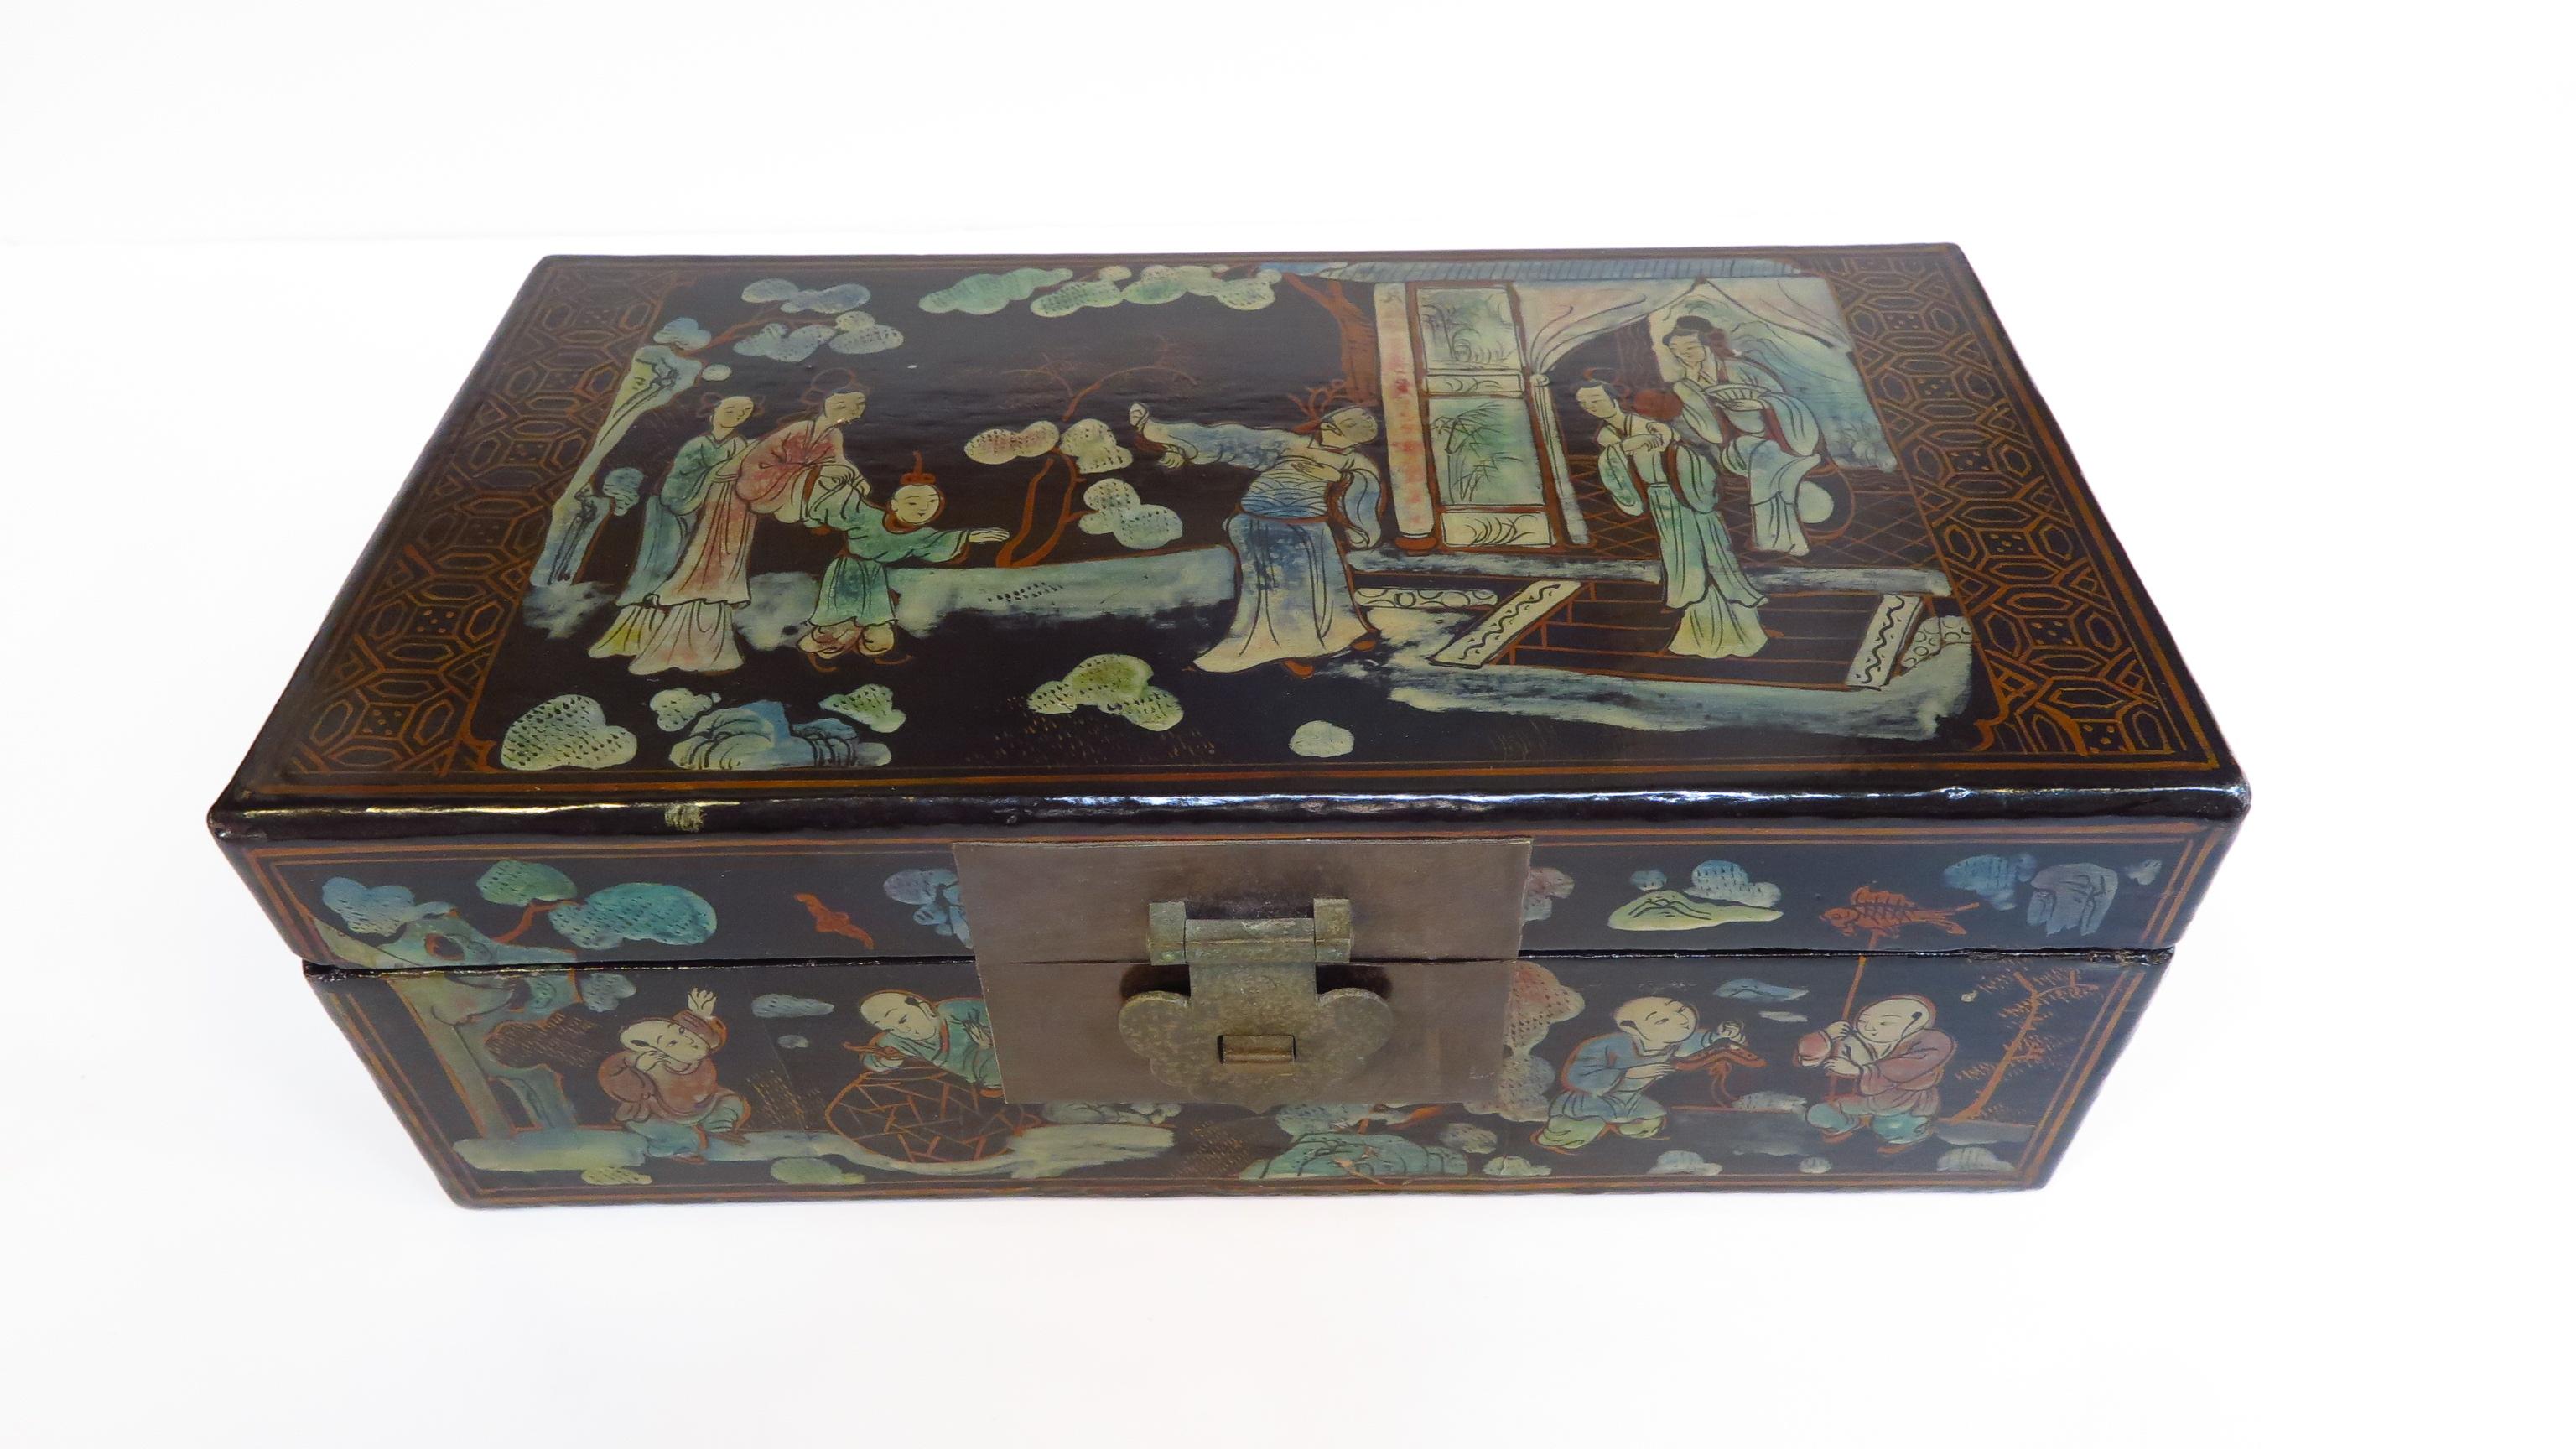 Antique Chinese chinoiserie painted box. Painting on the box tells several stories all happening during a large harvest that is very auspicious. A celebration in the making of success. Very beautiful paint work with worn soft colors captured in the